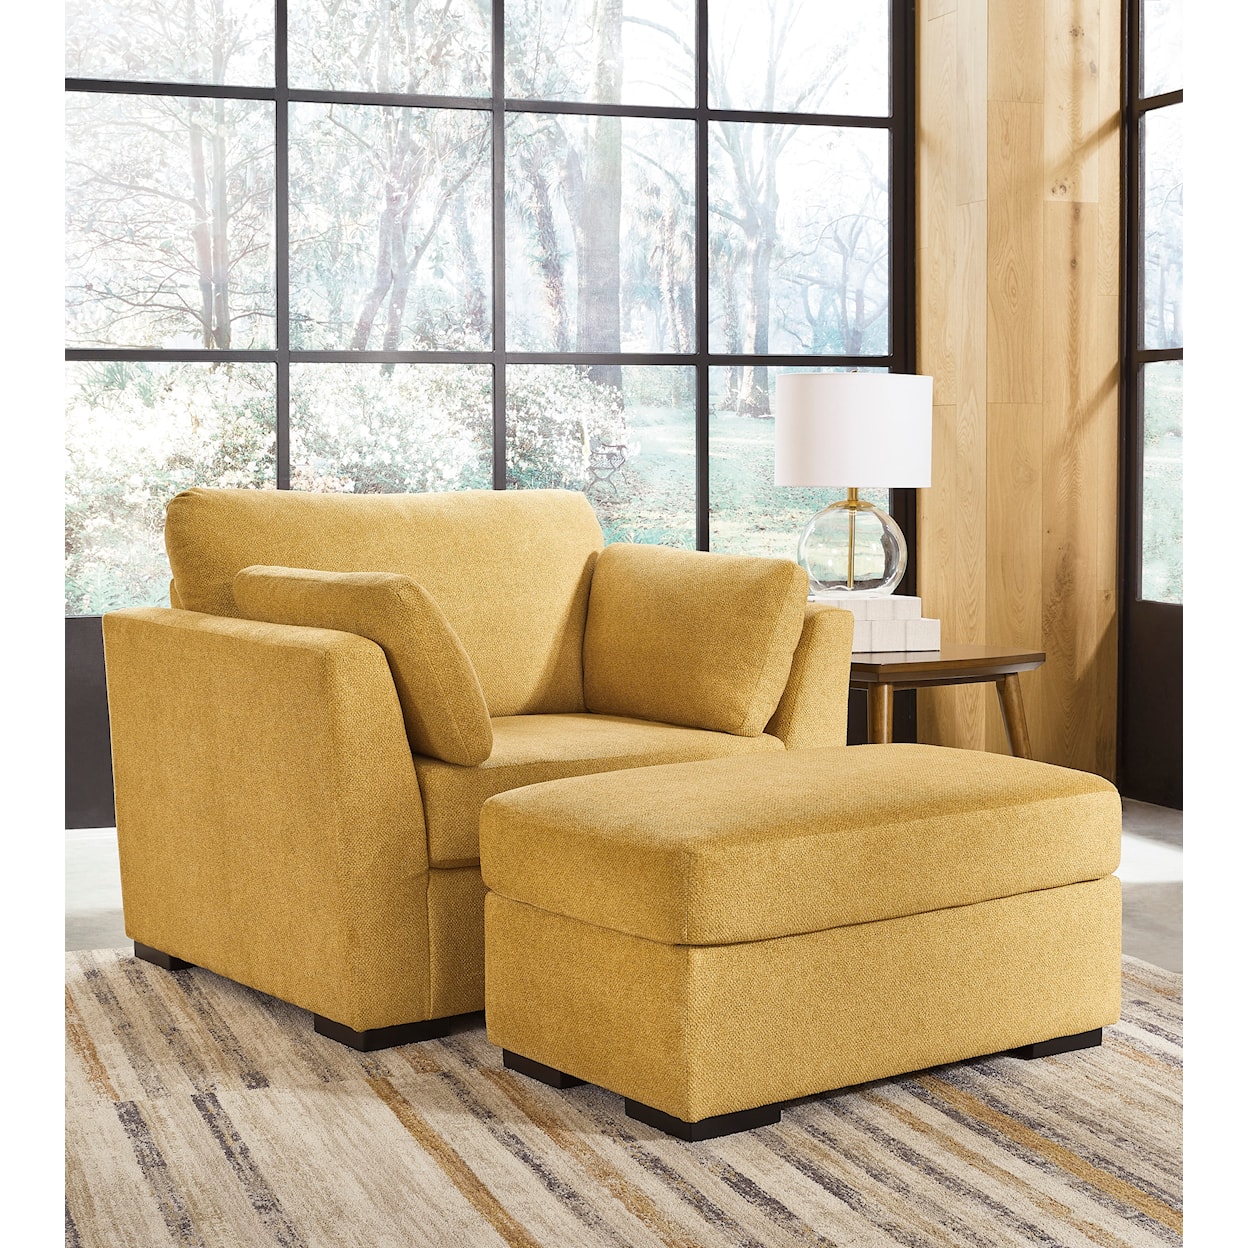 Signature Design Keerwick Oversized Chair and Ottoman